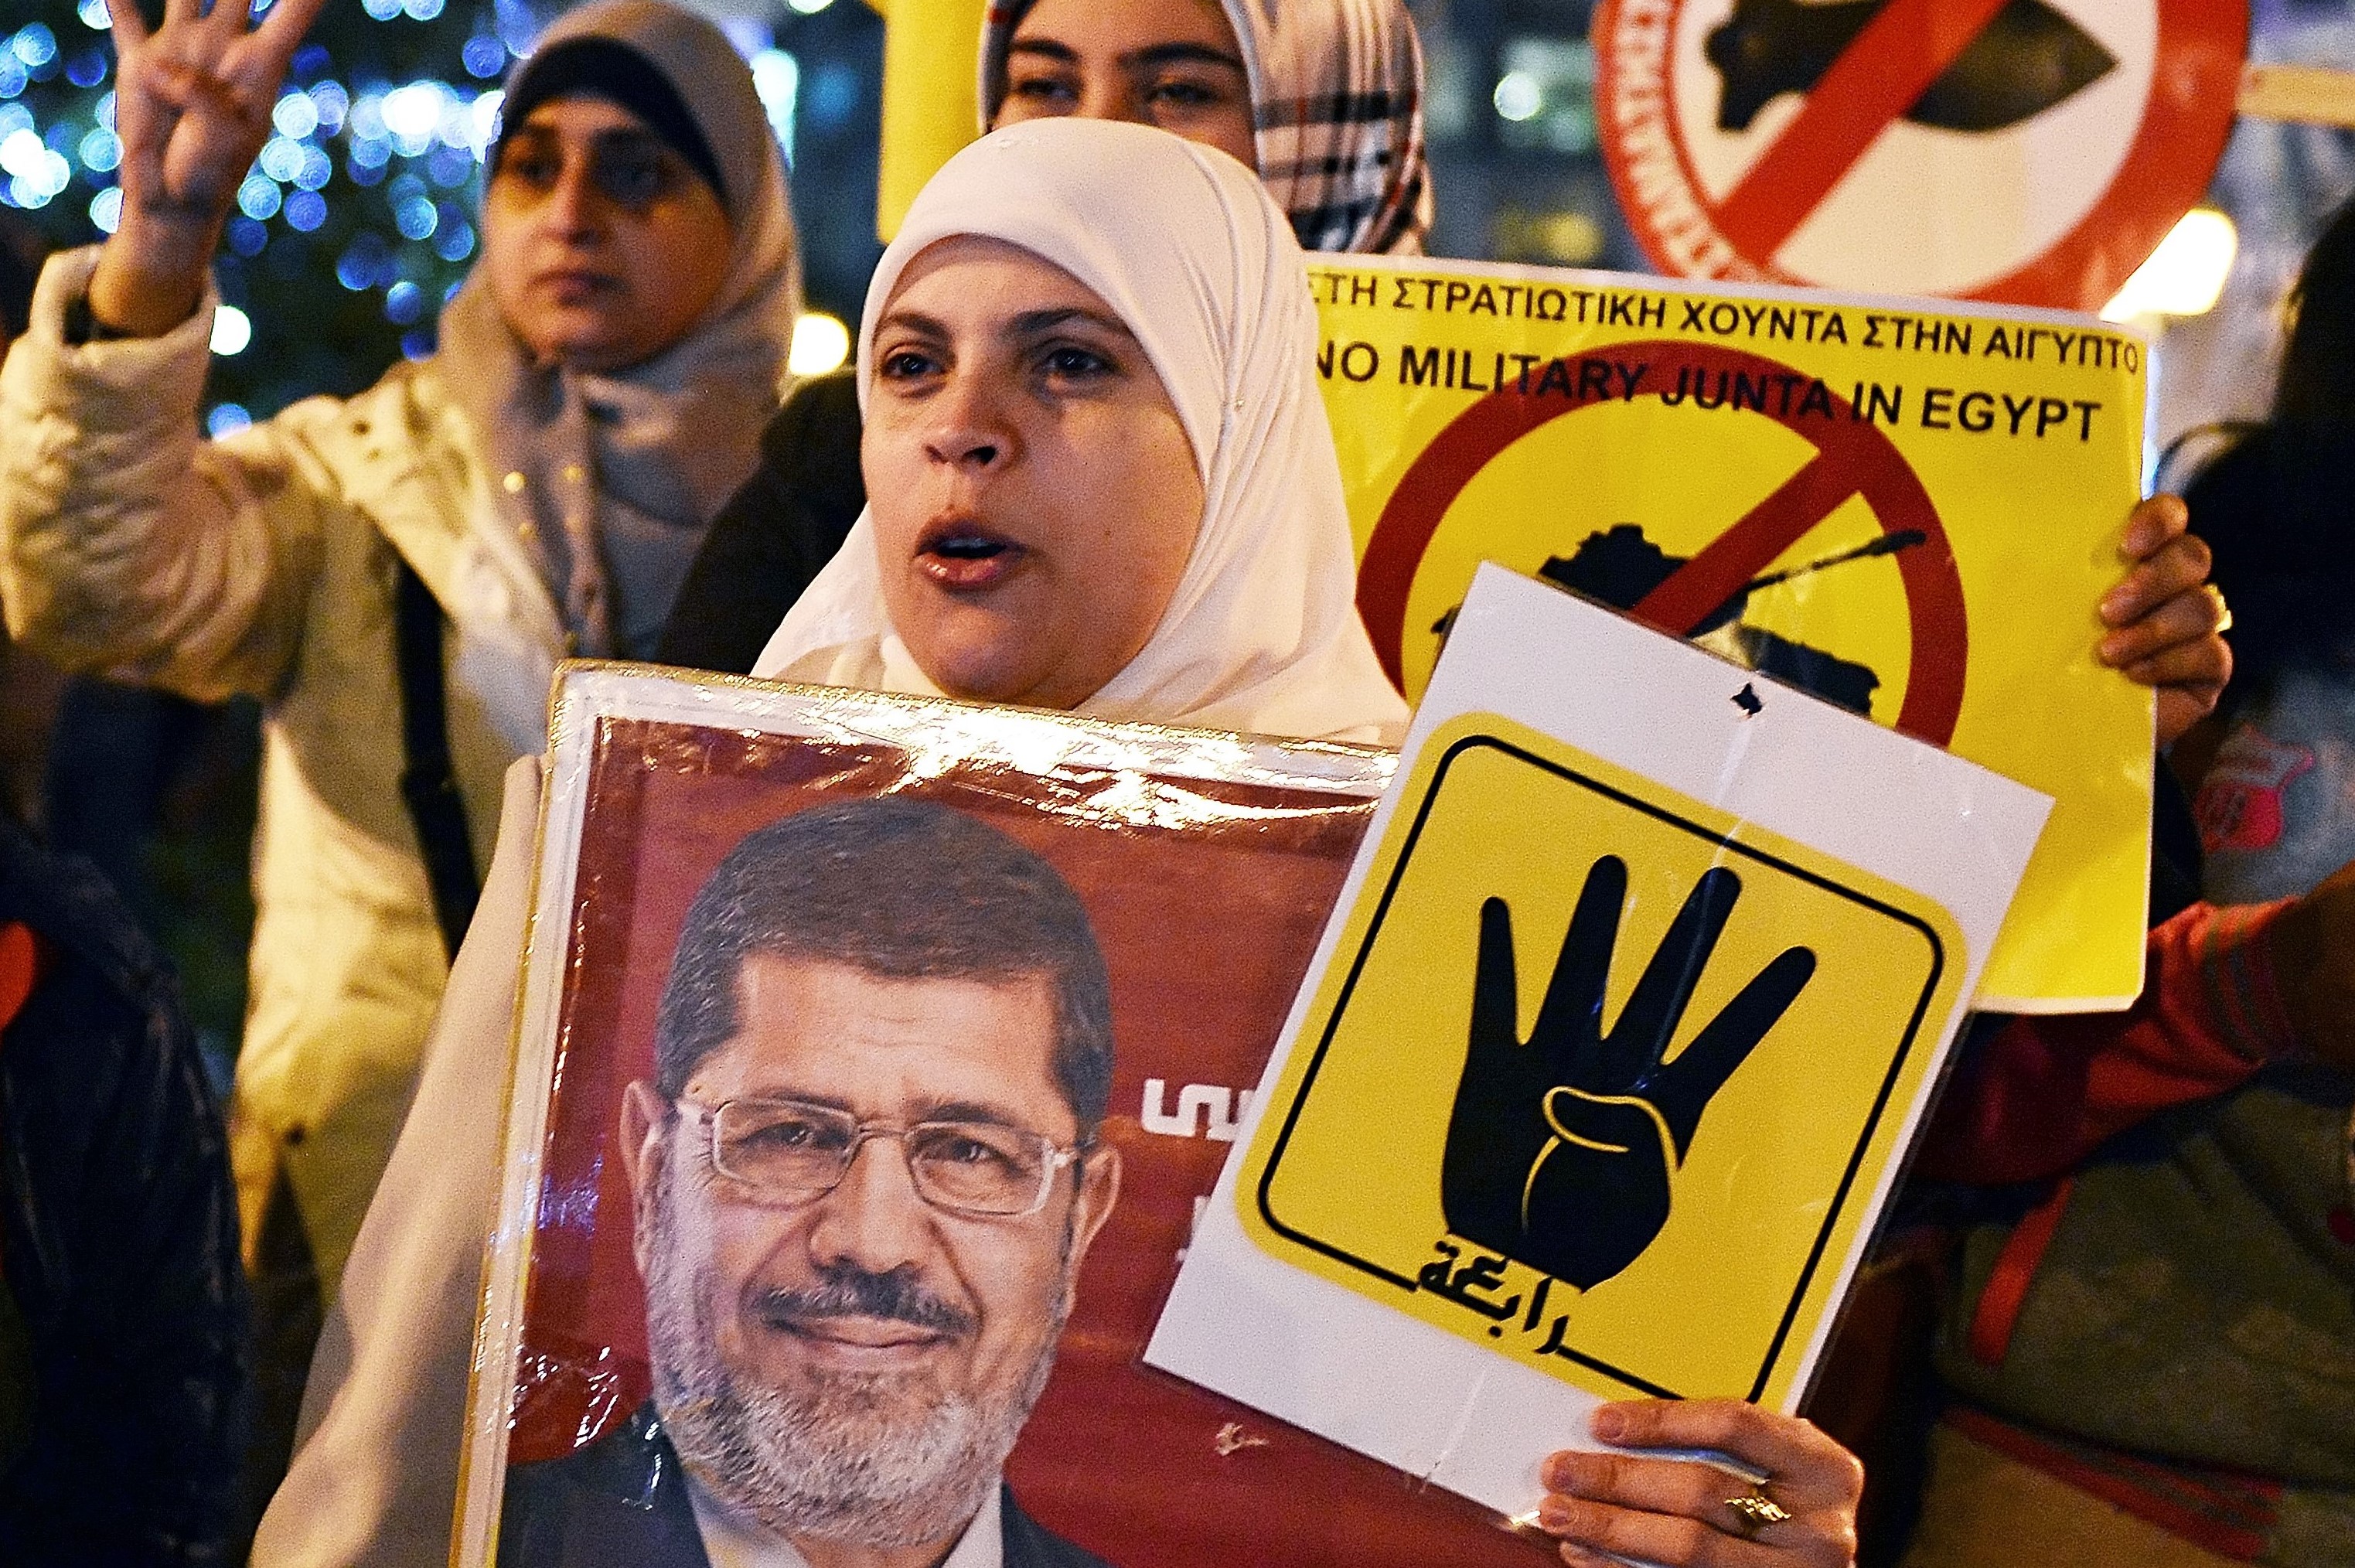   A woman holds up a banner of former Egyptian President Mohamed Morsi in anti-Sisi protest in Athenes in December 2015 (AFP)